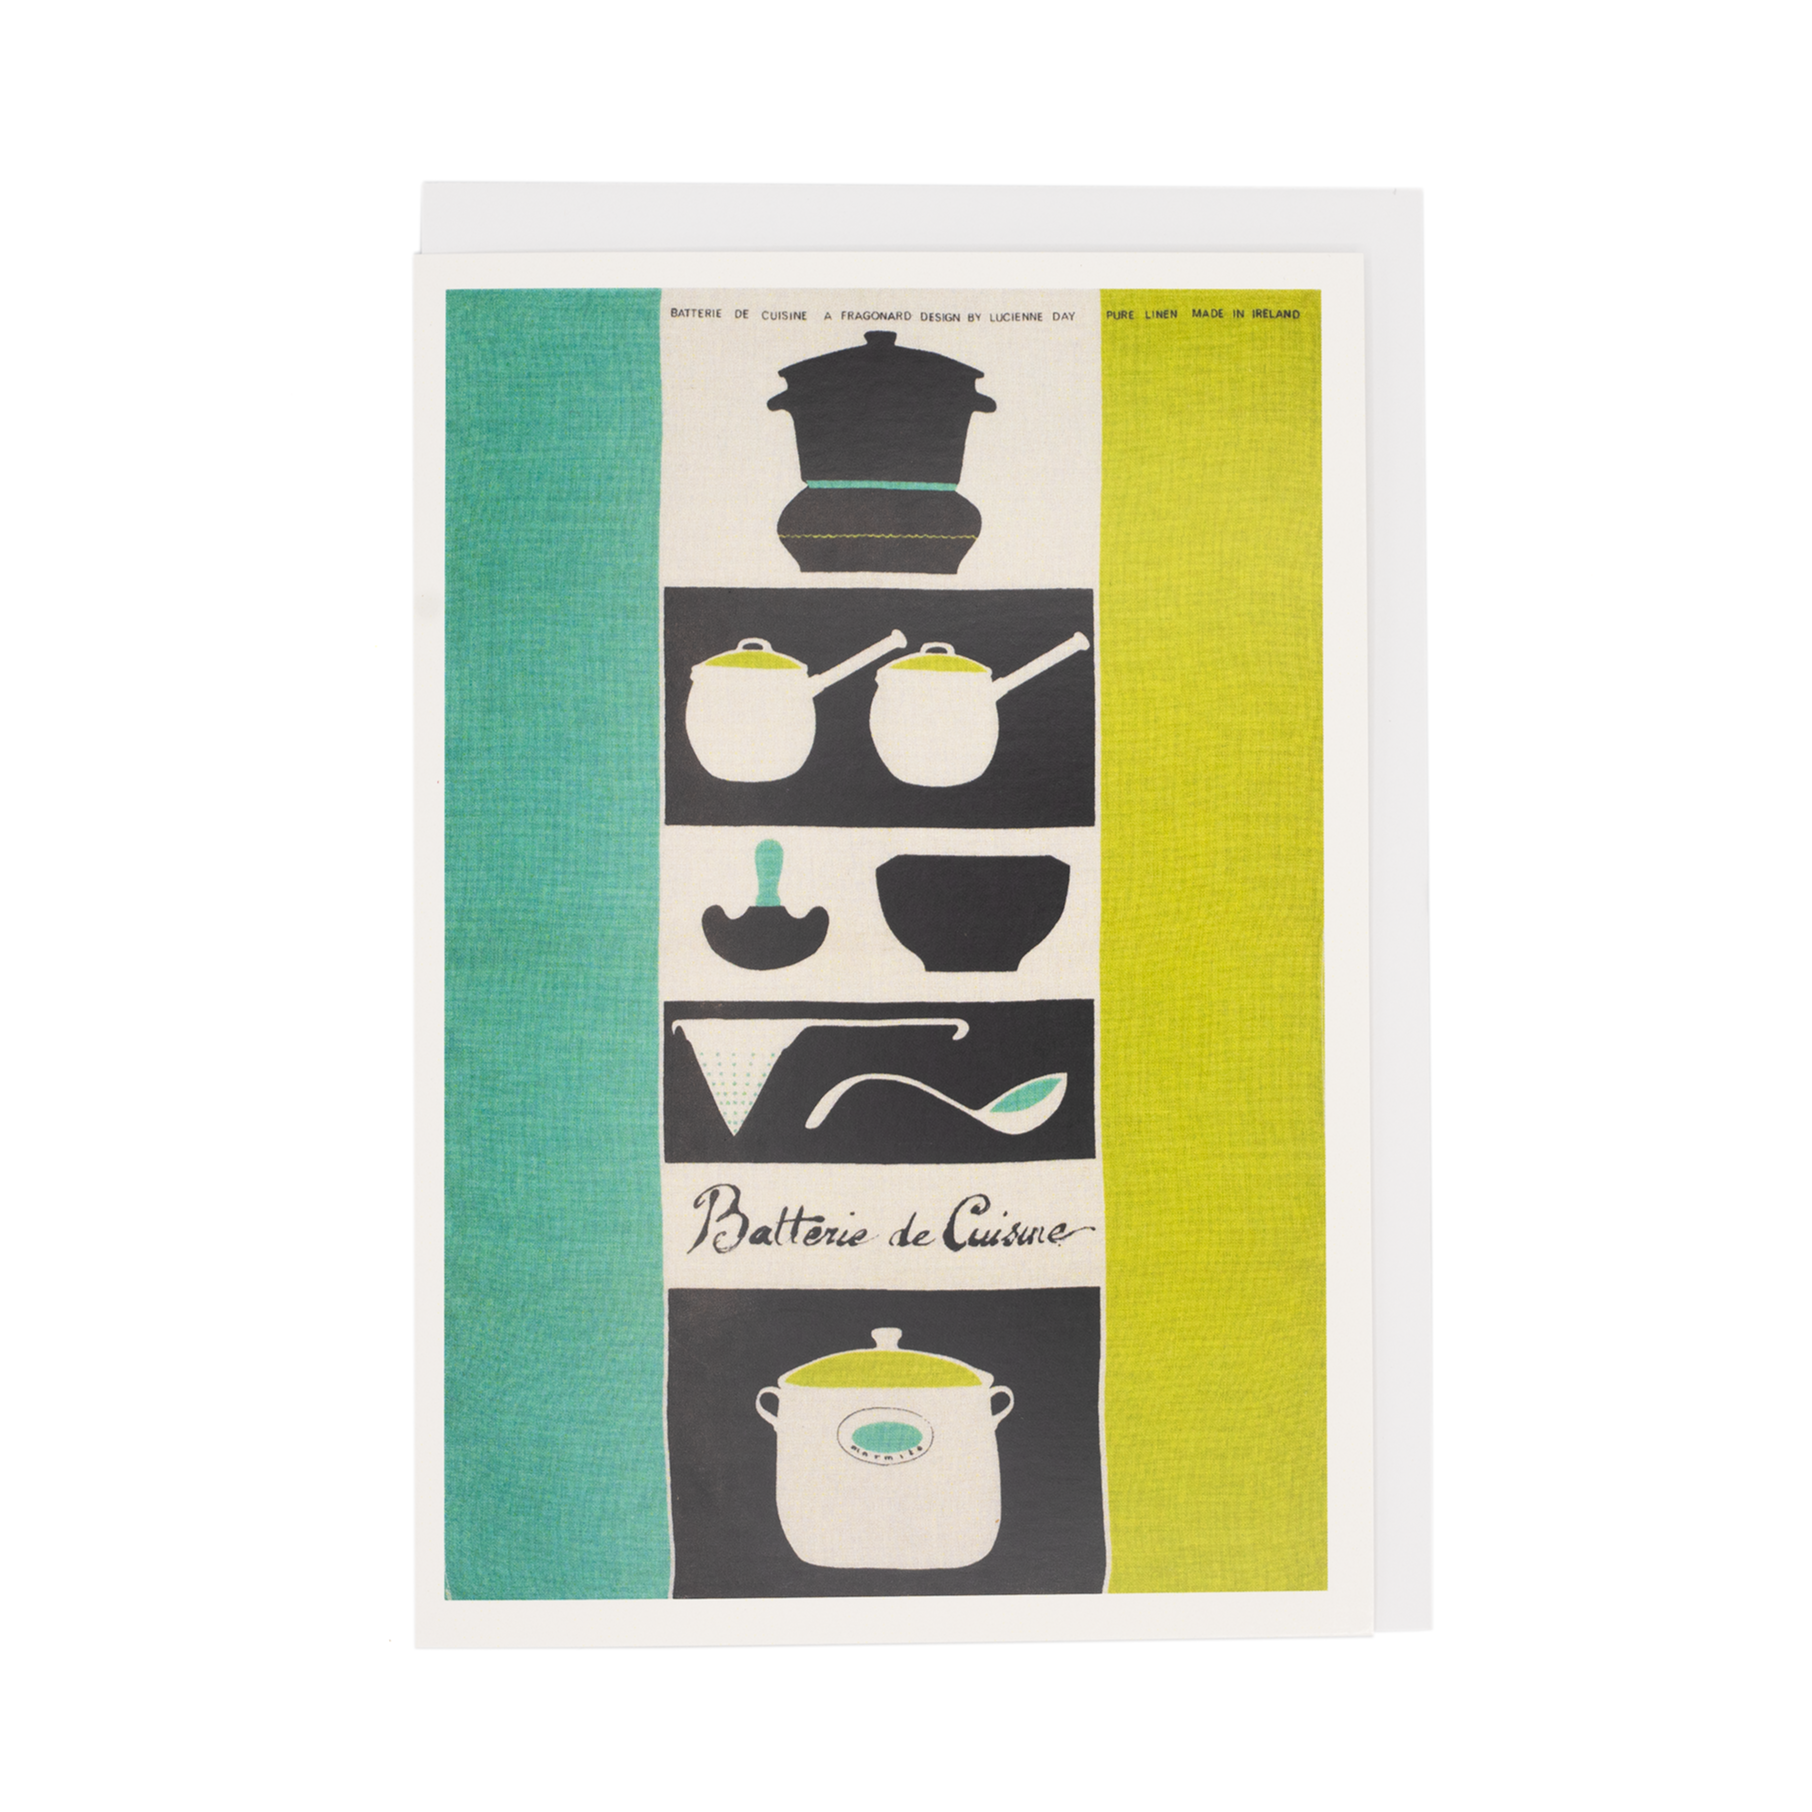 Image of 'Batterie de Cuisine' greetings card by Lucienne Day. Blue and yellow print with kitchenware pattern at the centre